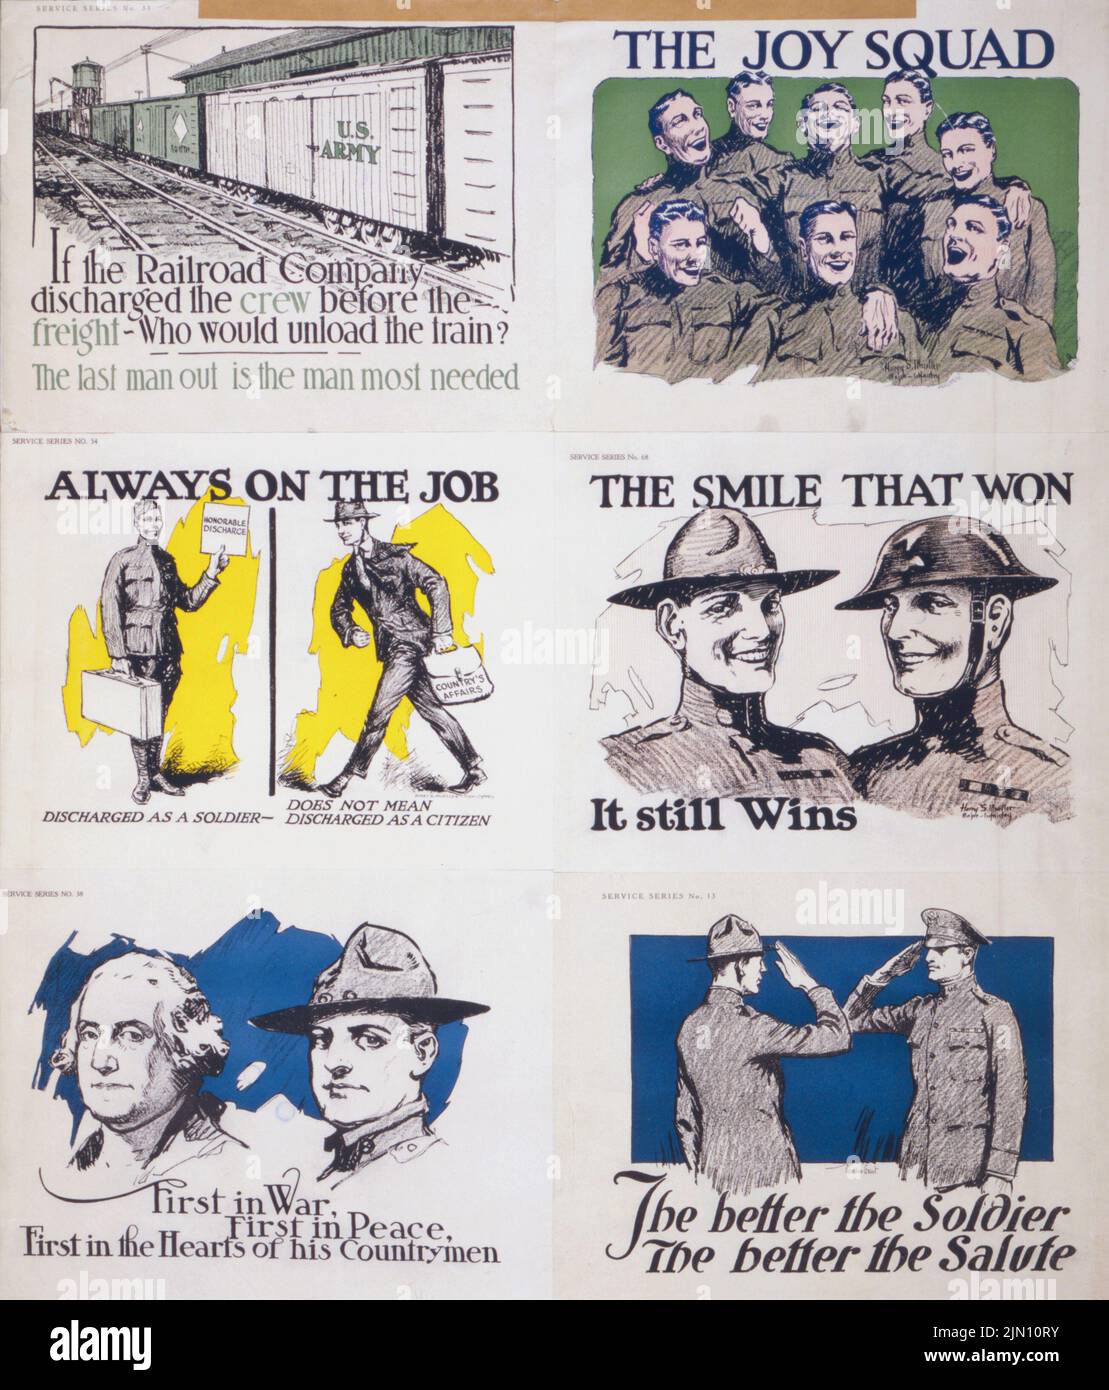 The Joy Squad, Always on the Job, The Smile That Won It Still Wins, First in War First in Peace, The better the soldier, the better the salute (1918) American World War I era posters by Harry S. Mueller Stock Photo